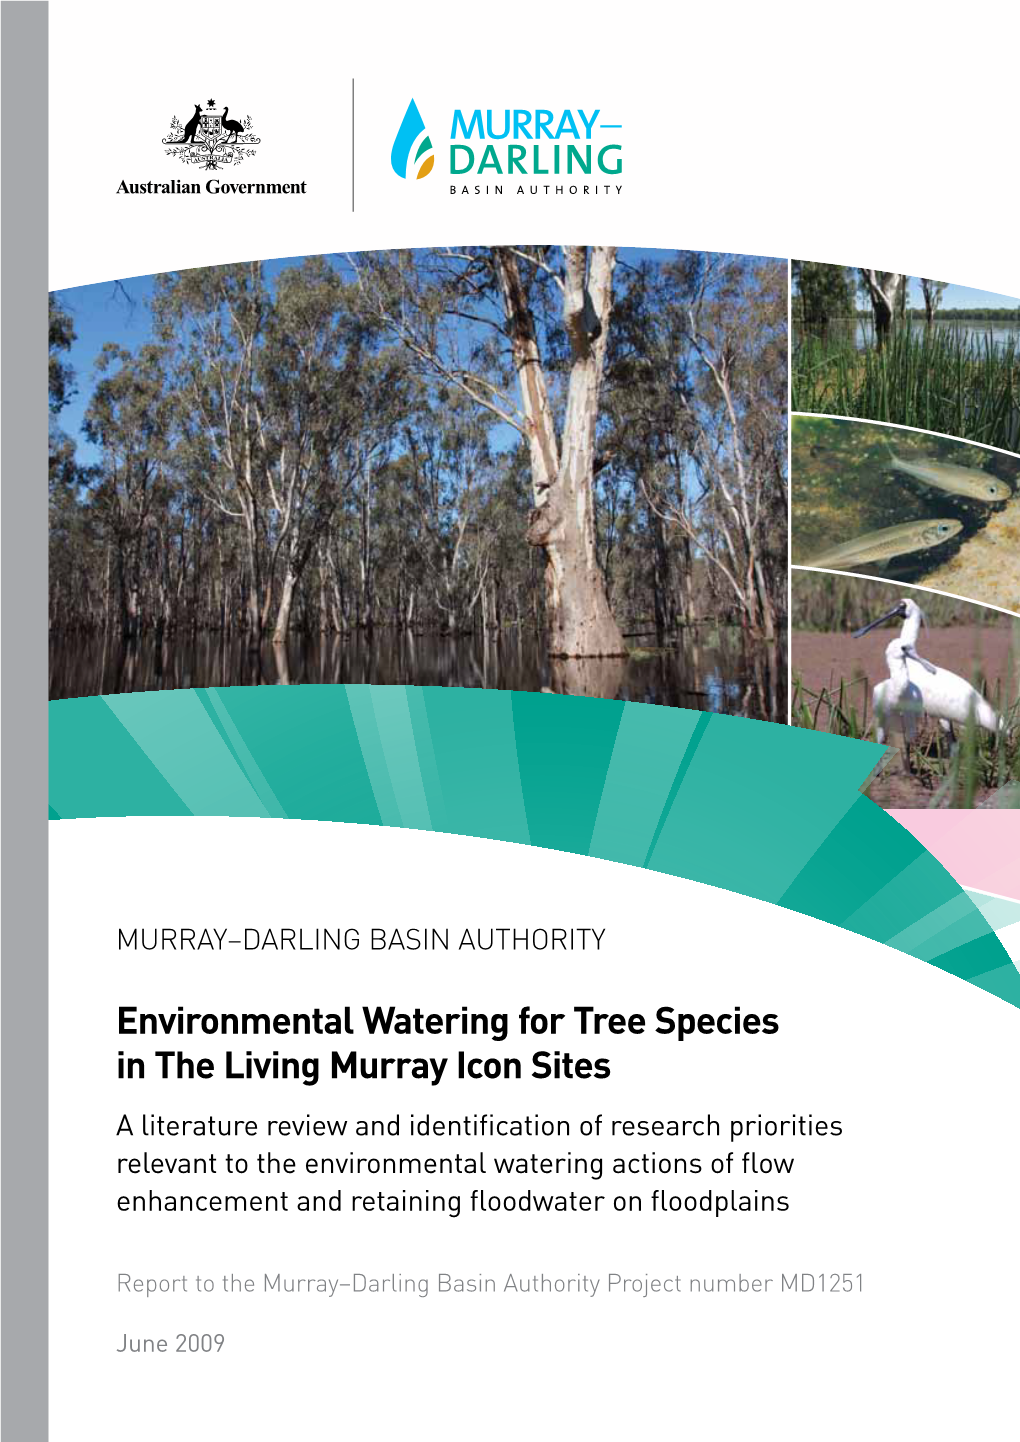 Environmental Watering for Tree Species in the Living Murray Icon